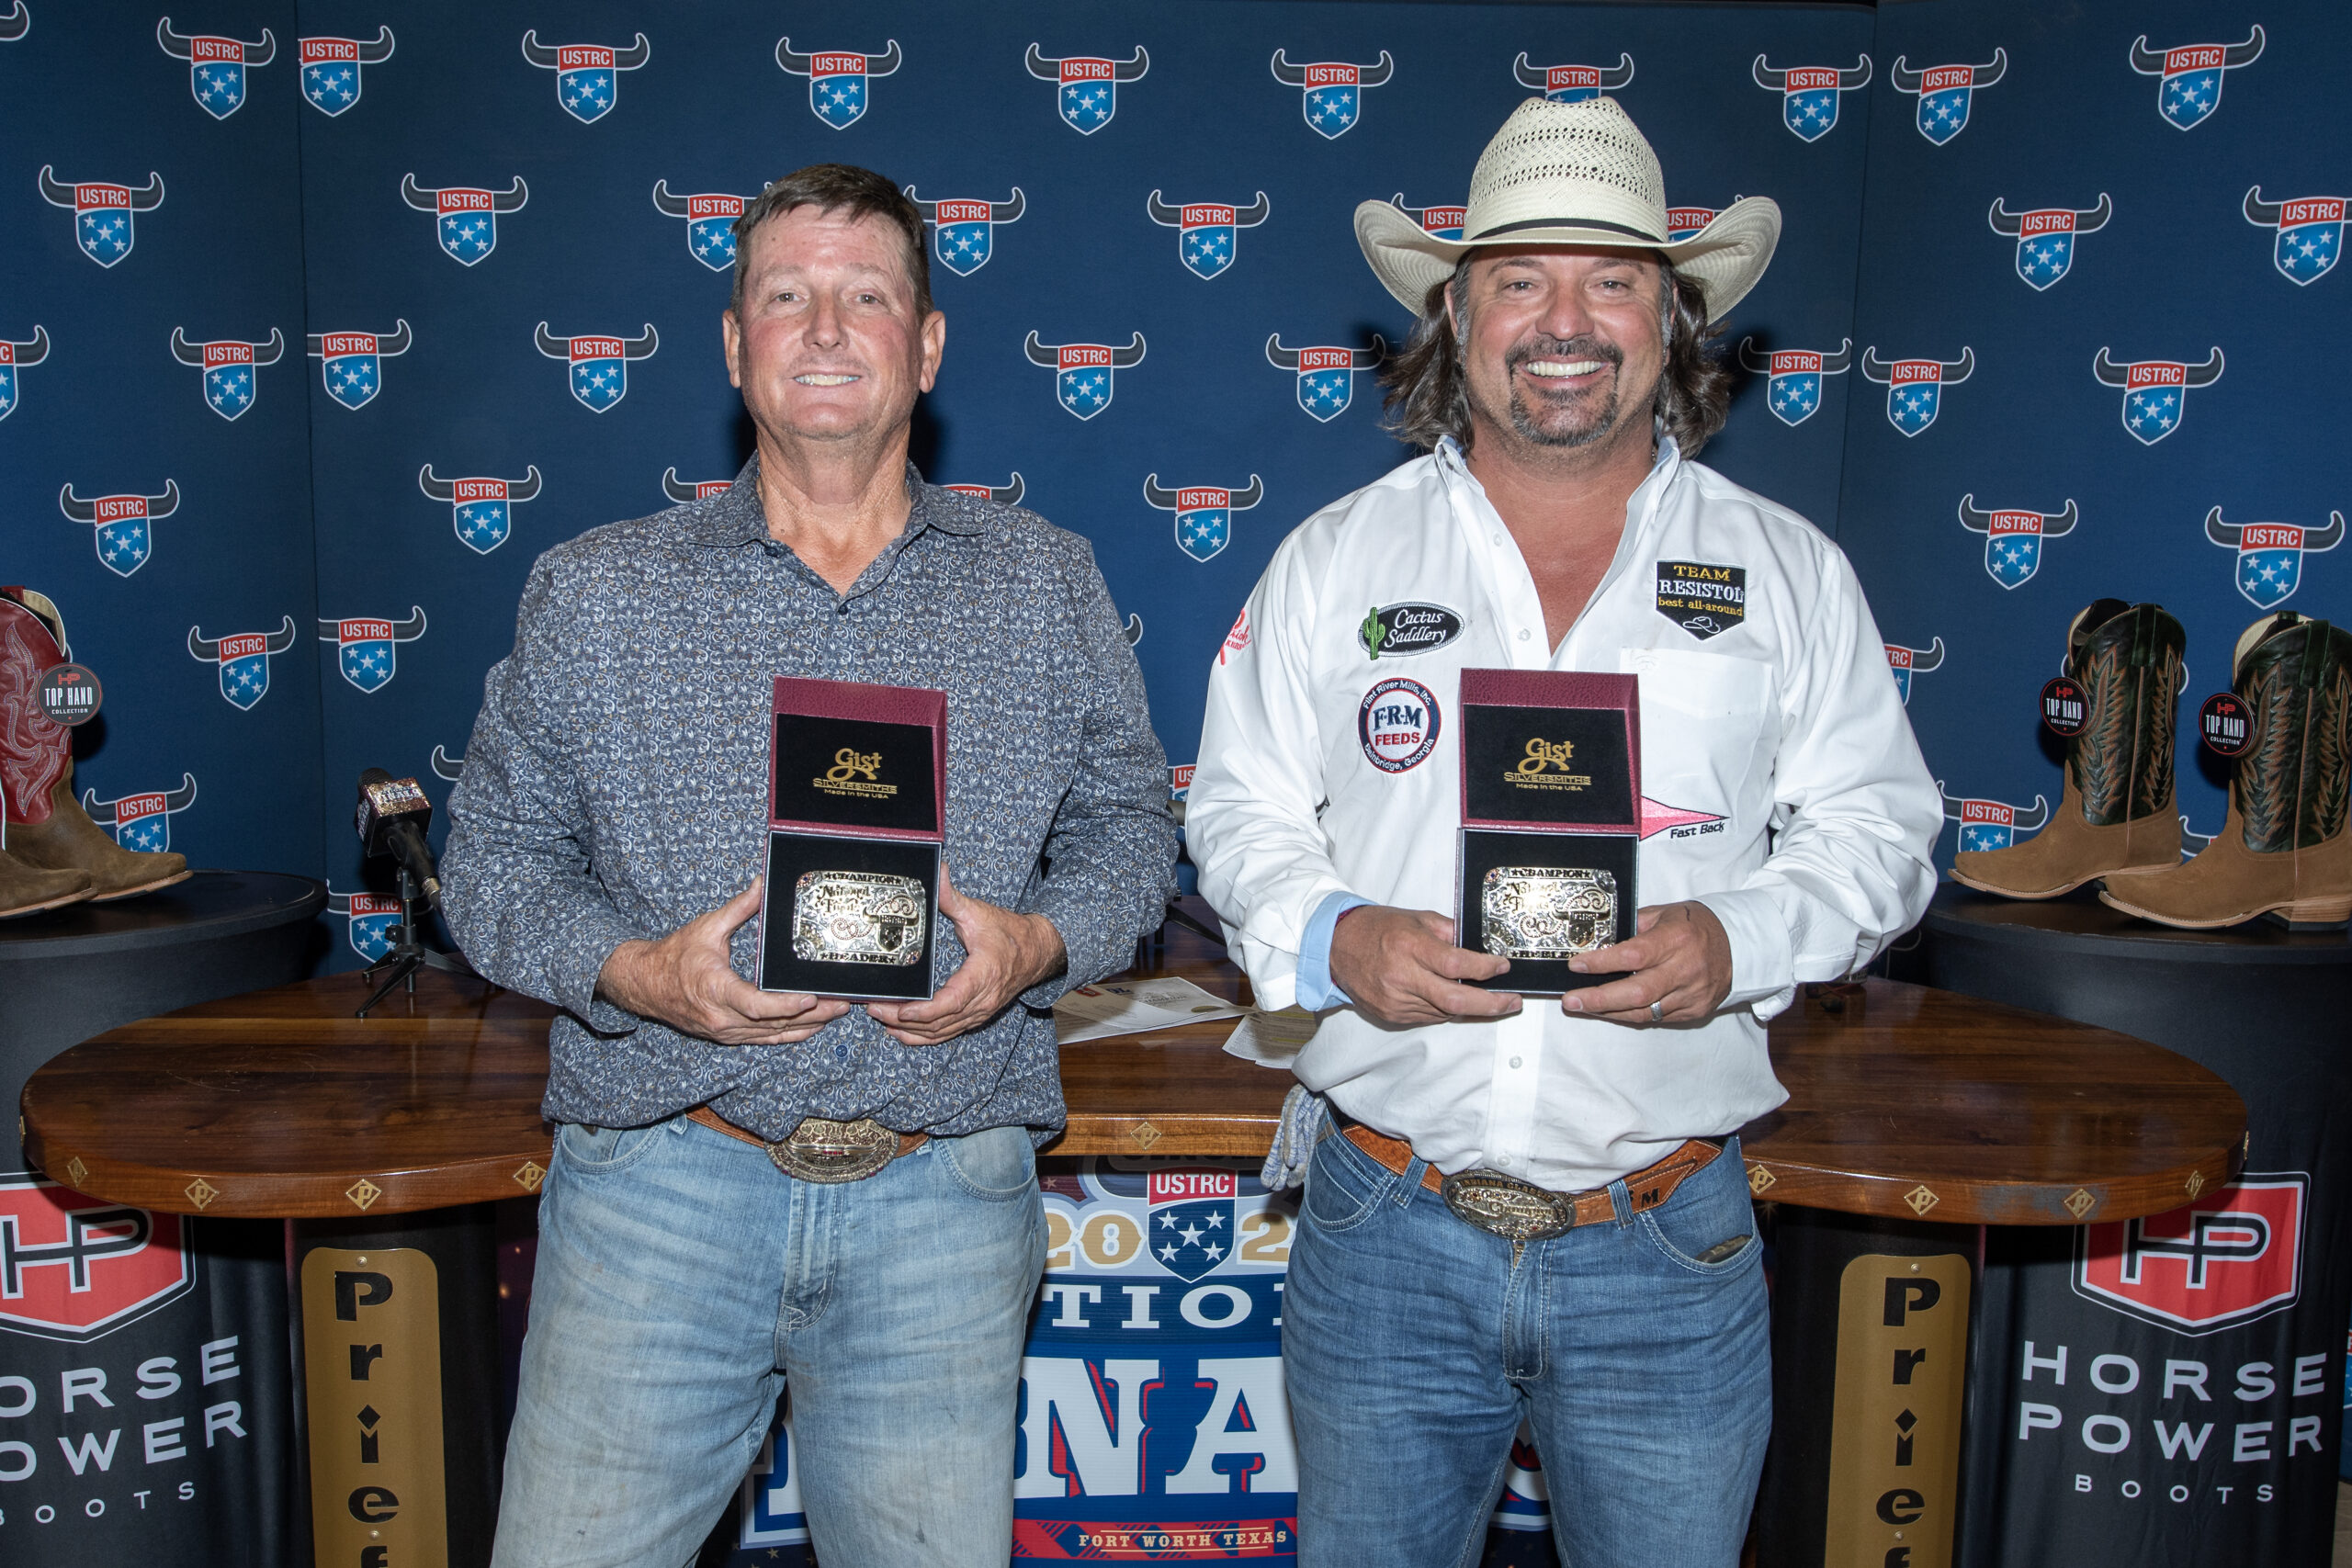 Kelly Cheatham and Brock Middleton with their buckles for winning the Horse Power Boots #9.5 Legends Over 50.